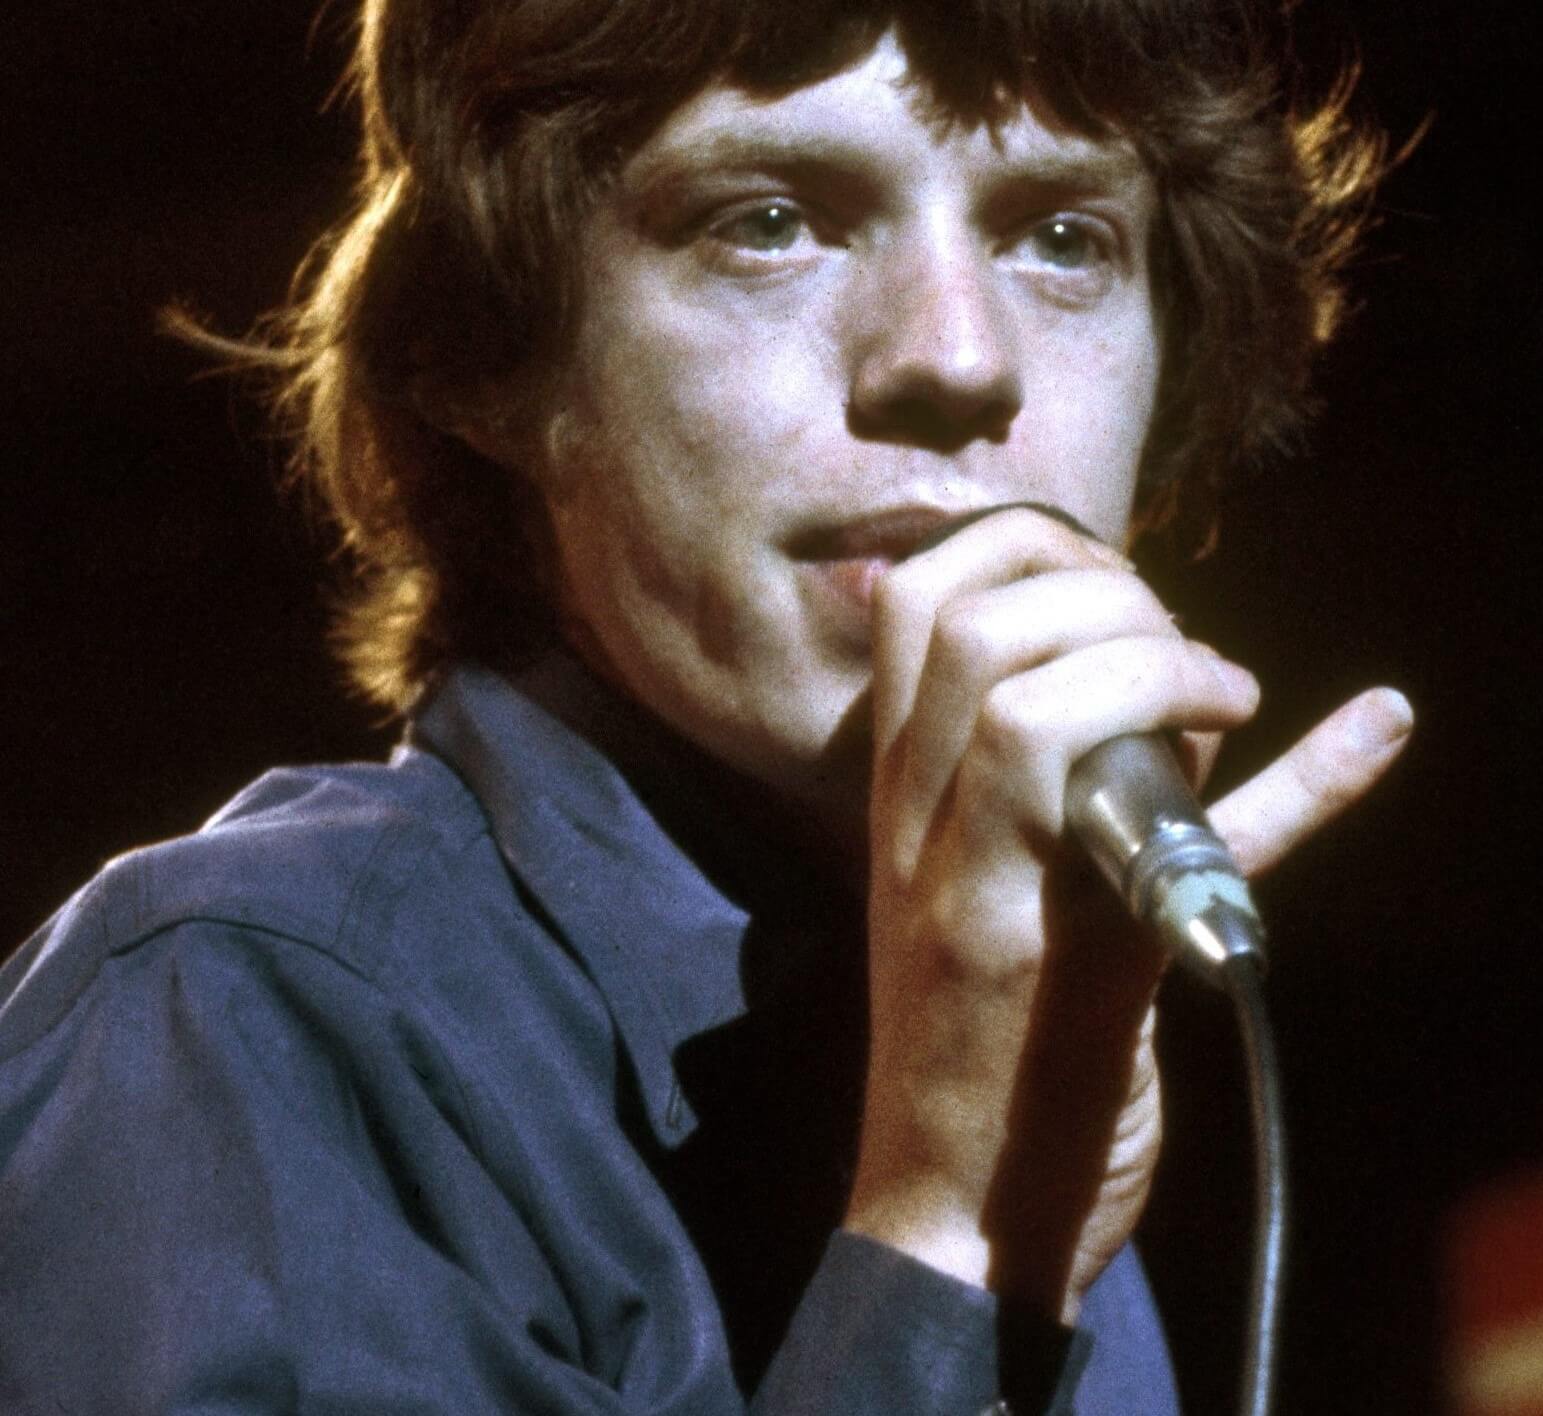 The Rolling Stones' Mick Jagger wearing blue